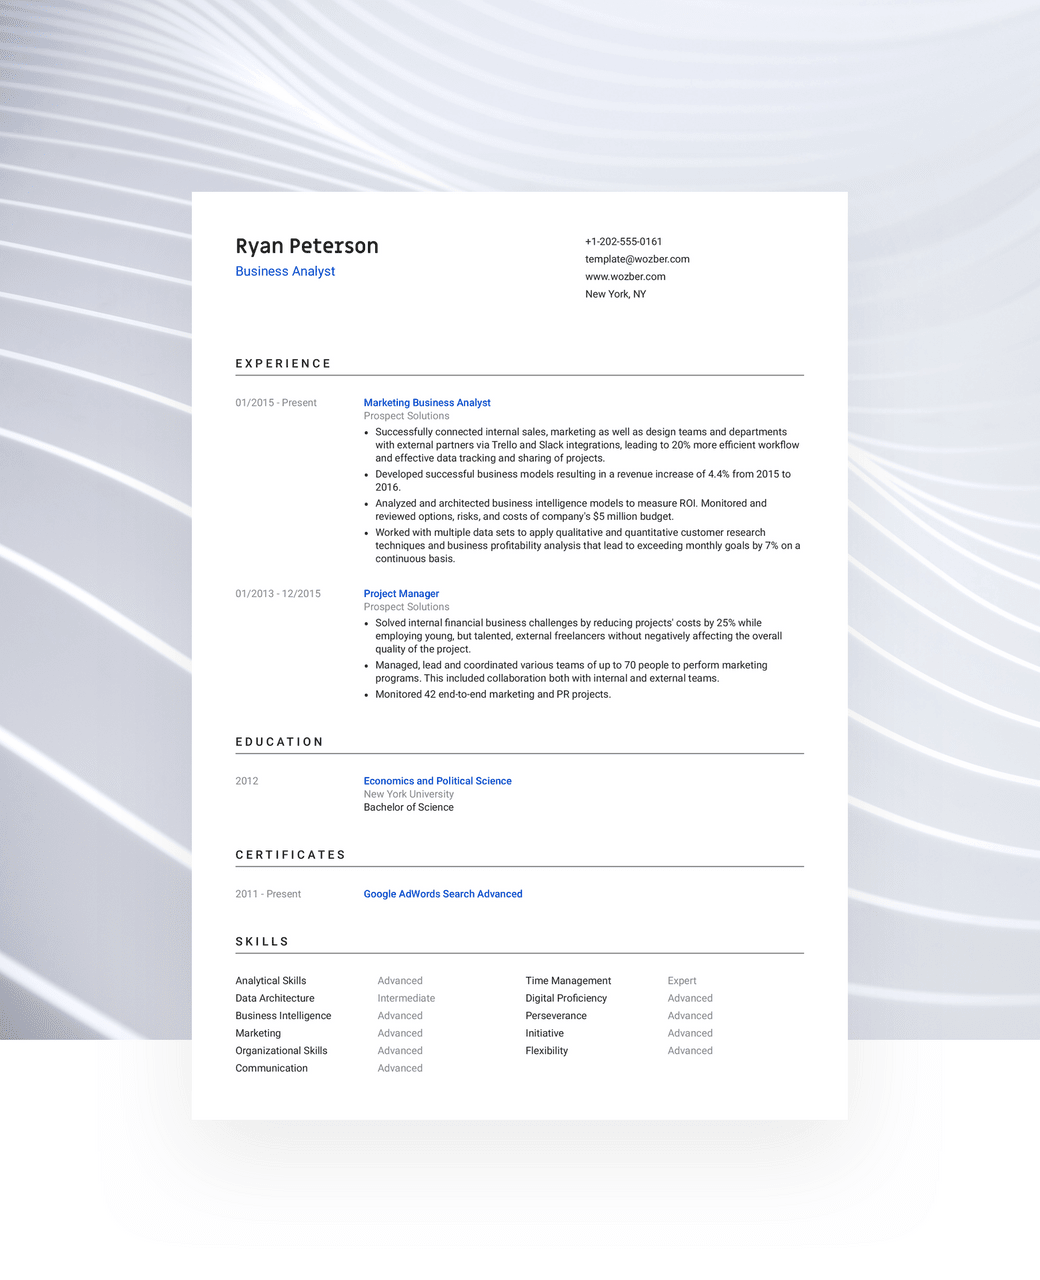 A classic format CV template optimised for applicant tracking systems.